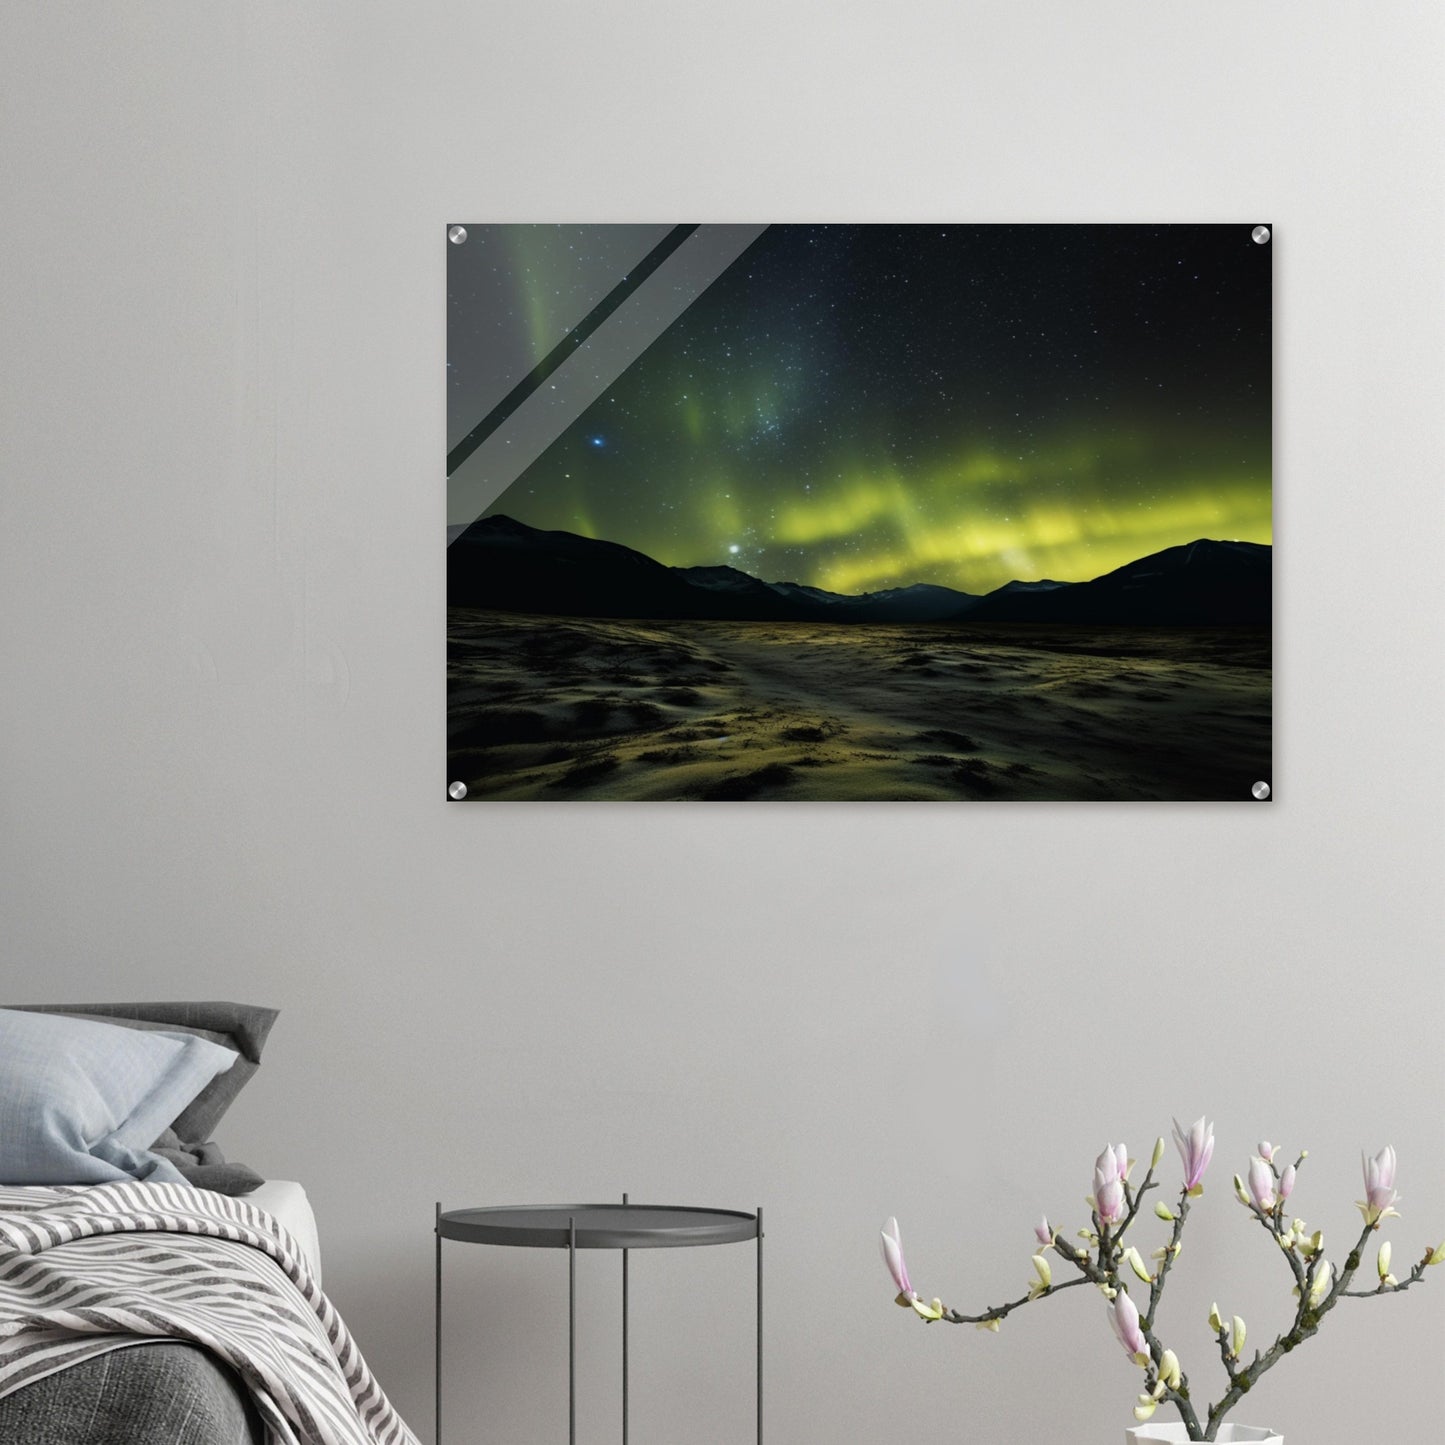 Unique Aurora Borealis Acrylic Prints - Multi Size Personalized Northern Light View - Modern Wall Art - Perfect Aurora Lovers Gift 7